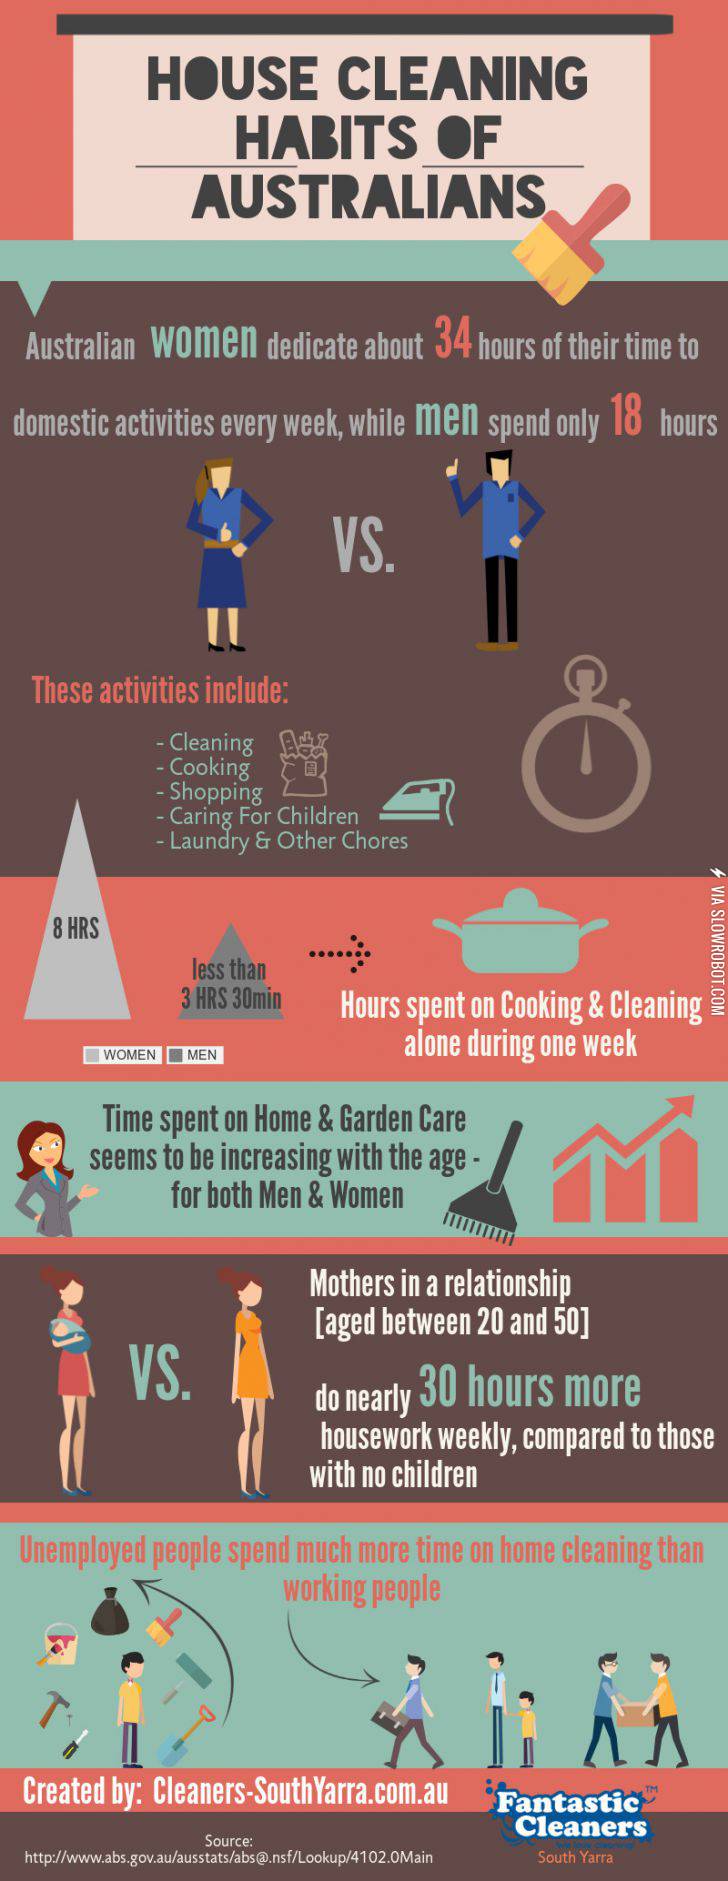 House+Cleaning+Habits+Of+Australians